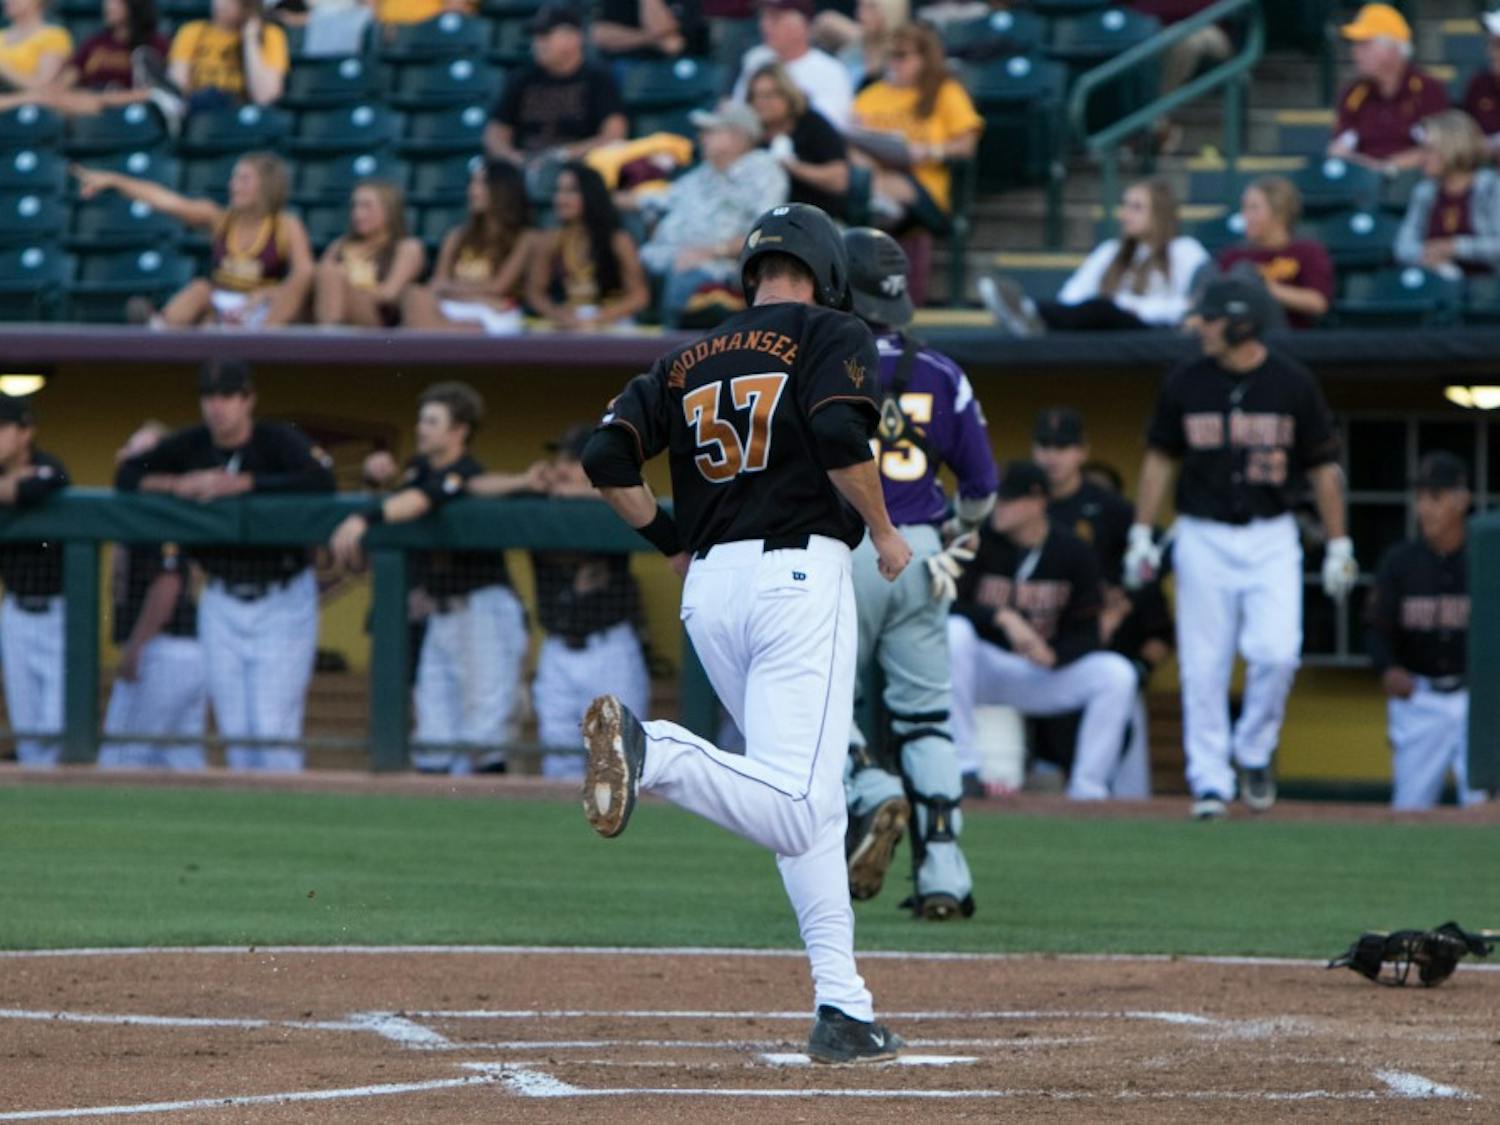 ASU baseball against the Tennessee Tech on Friday, April 24, 2015